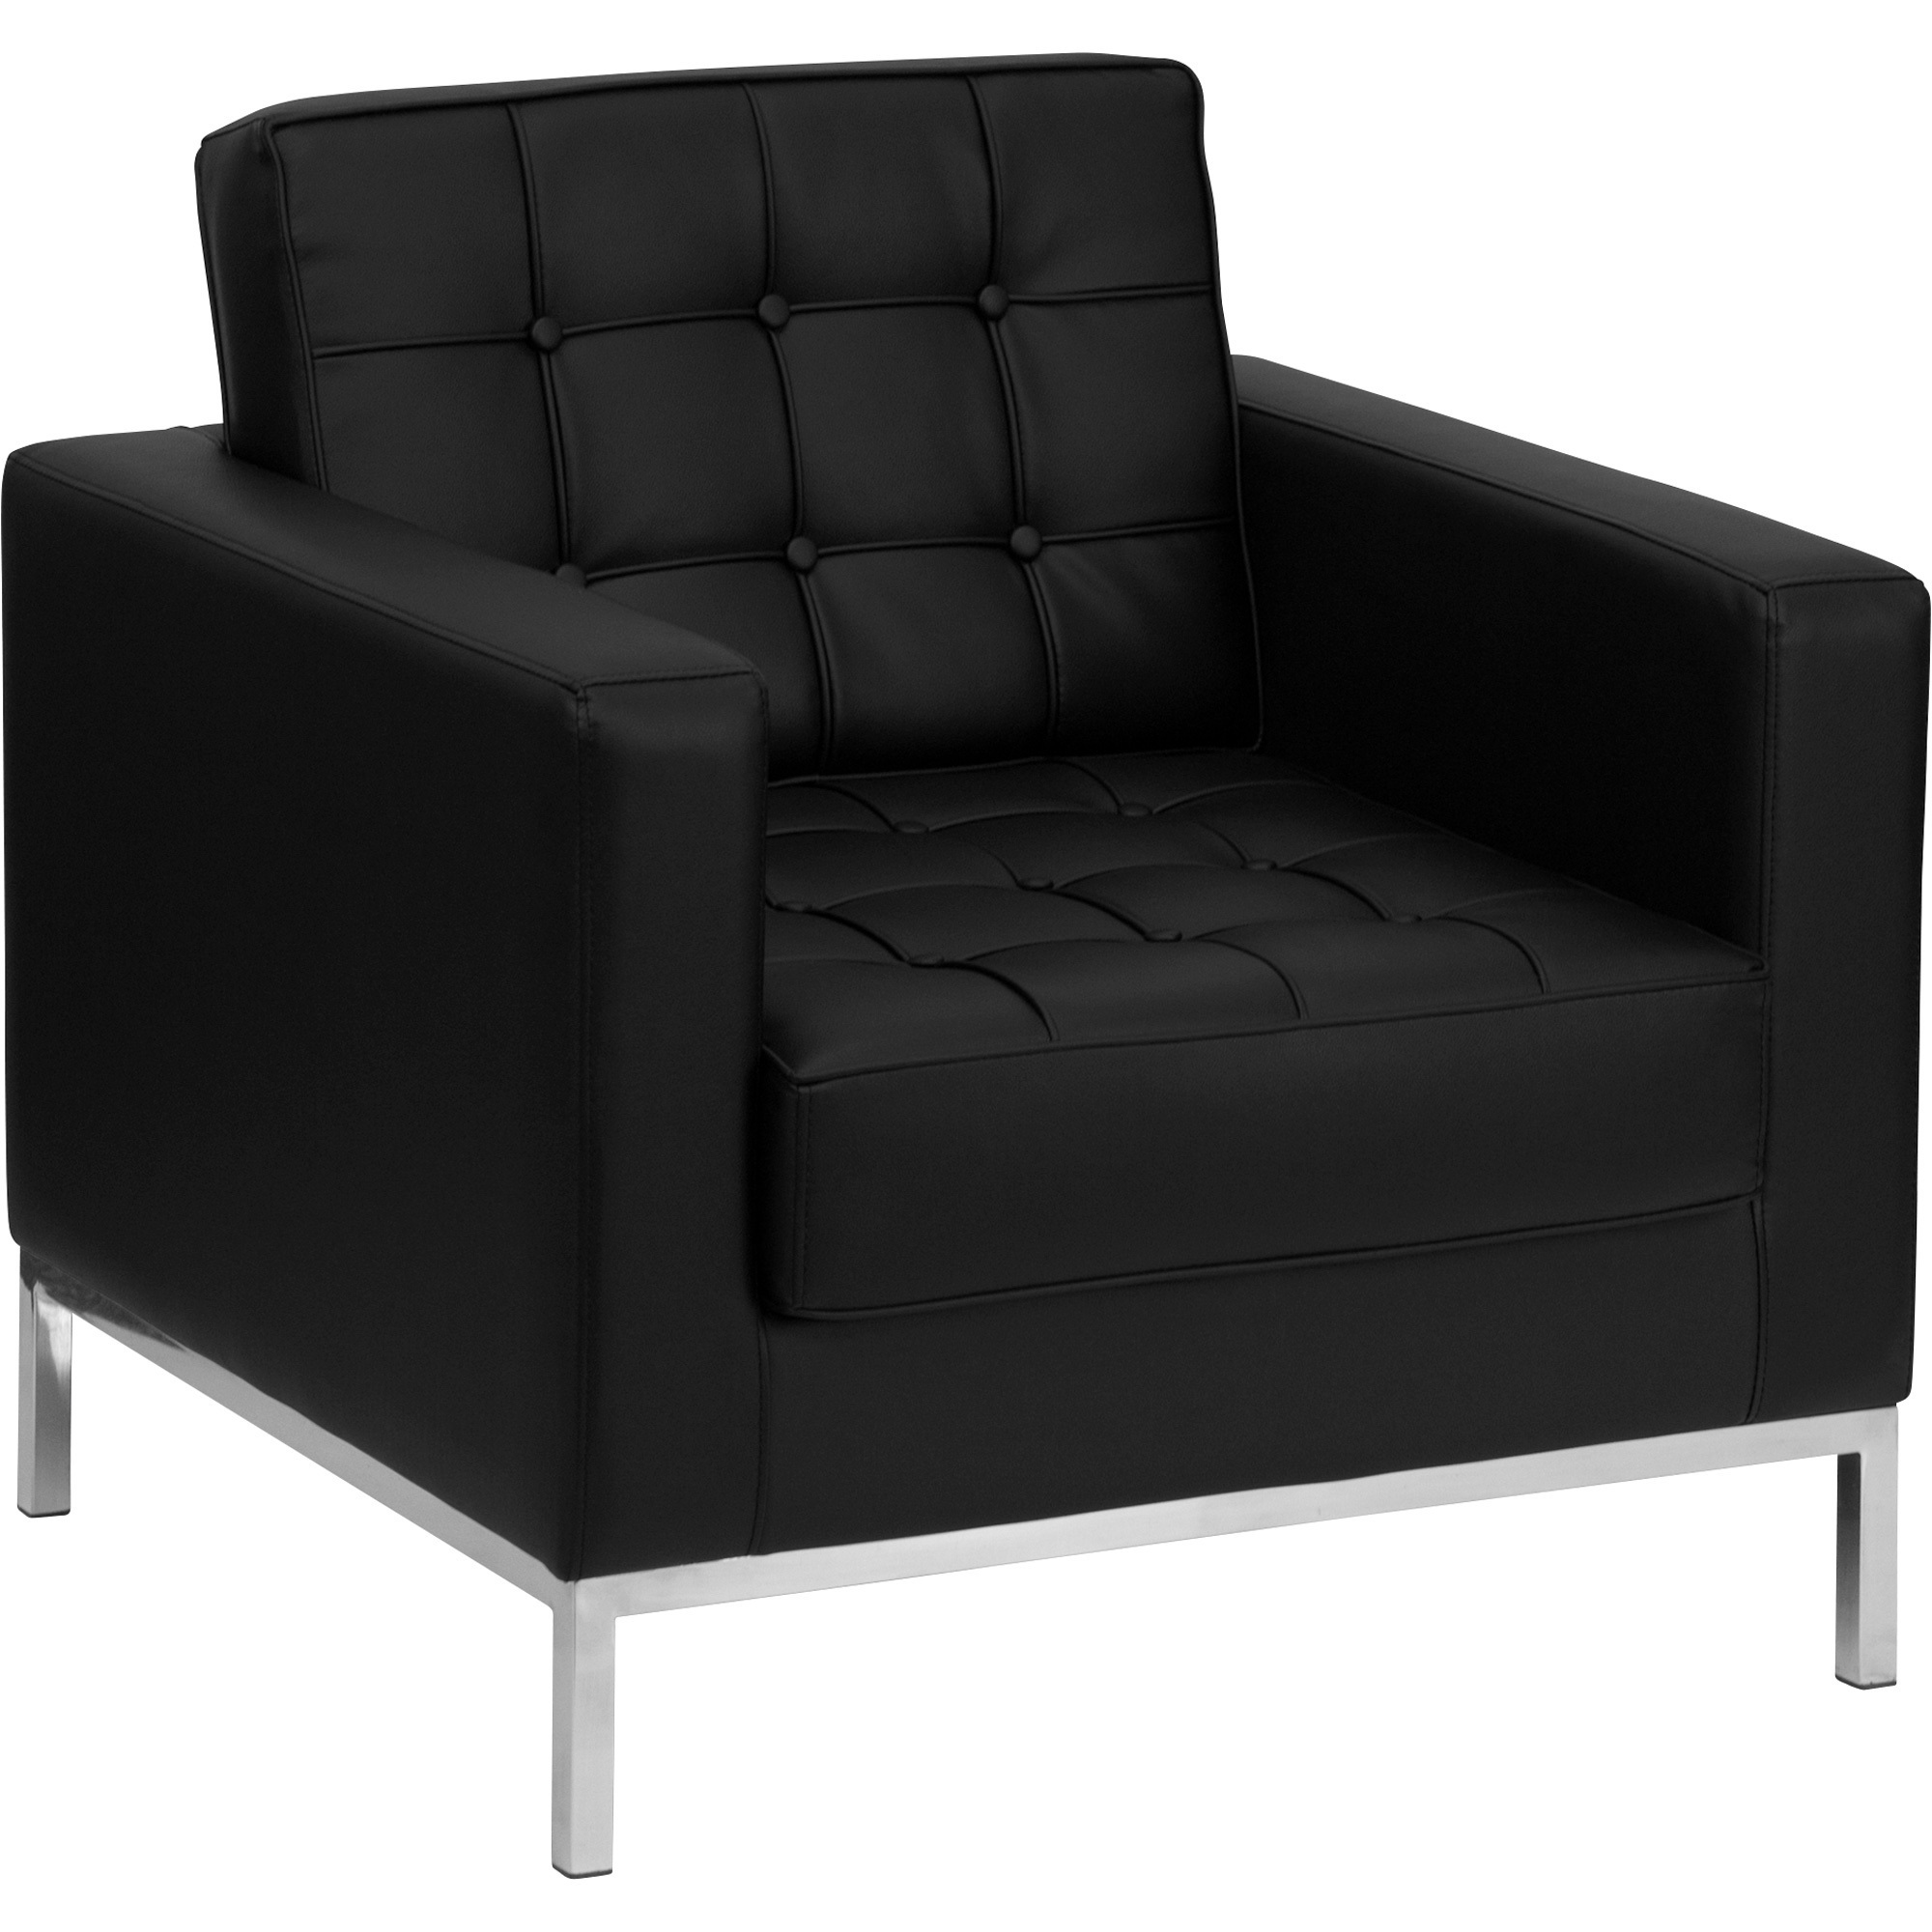 Flash Furniture LeatherSoft Chair with Stainless Steel Frame â Black, Model ZBLACEY8312CHBK